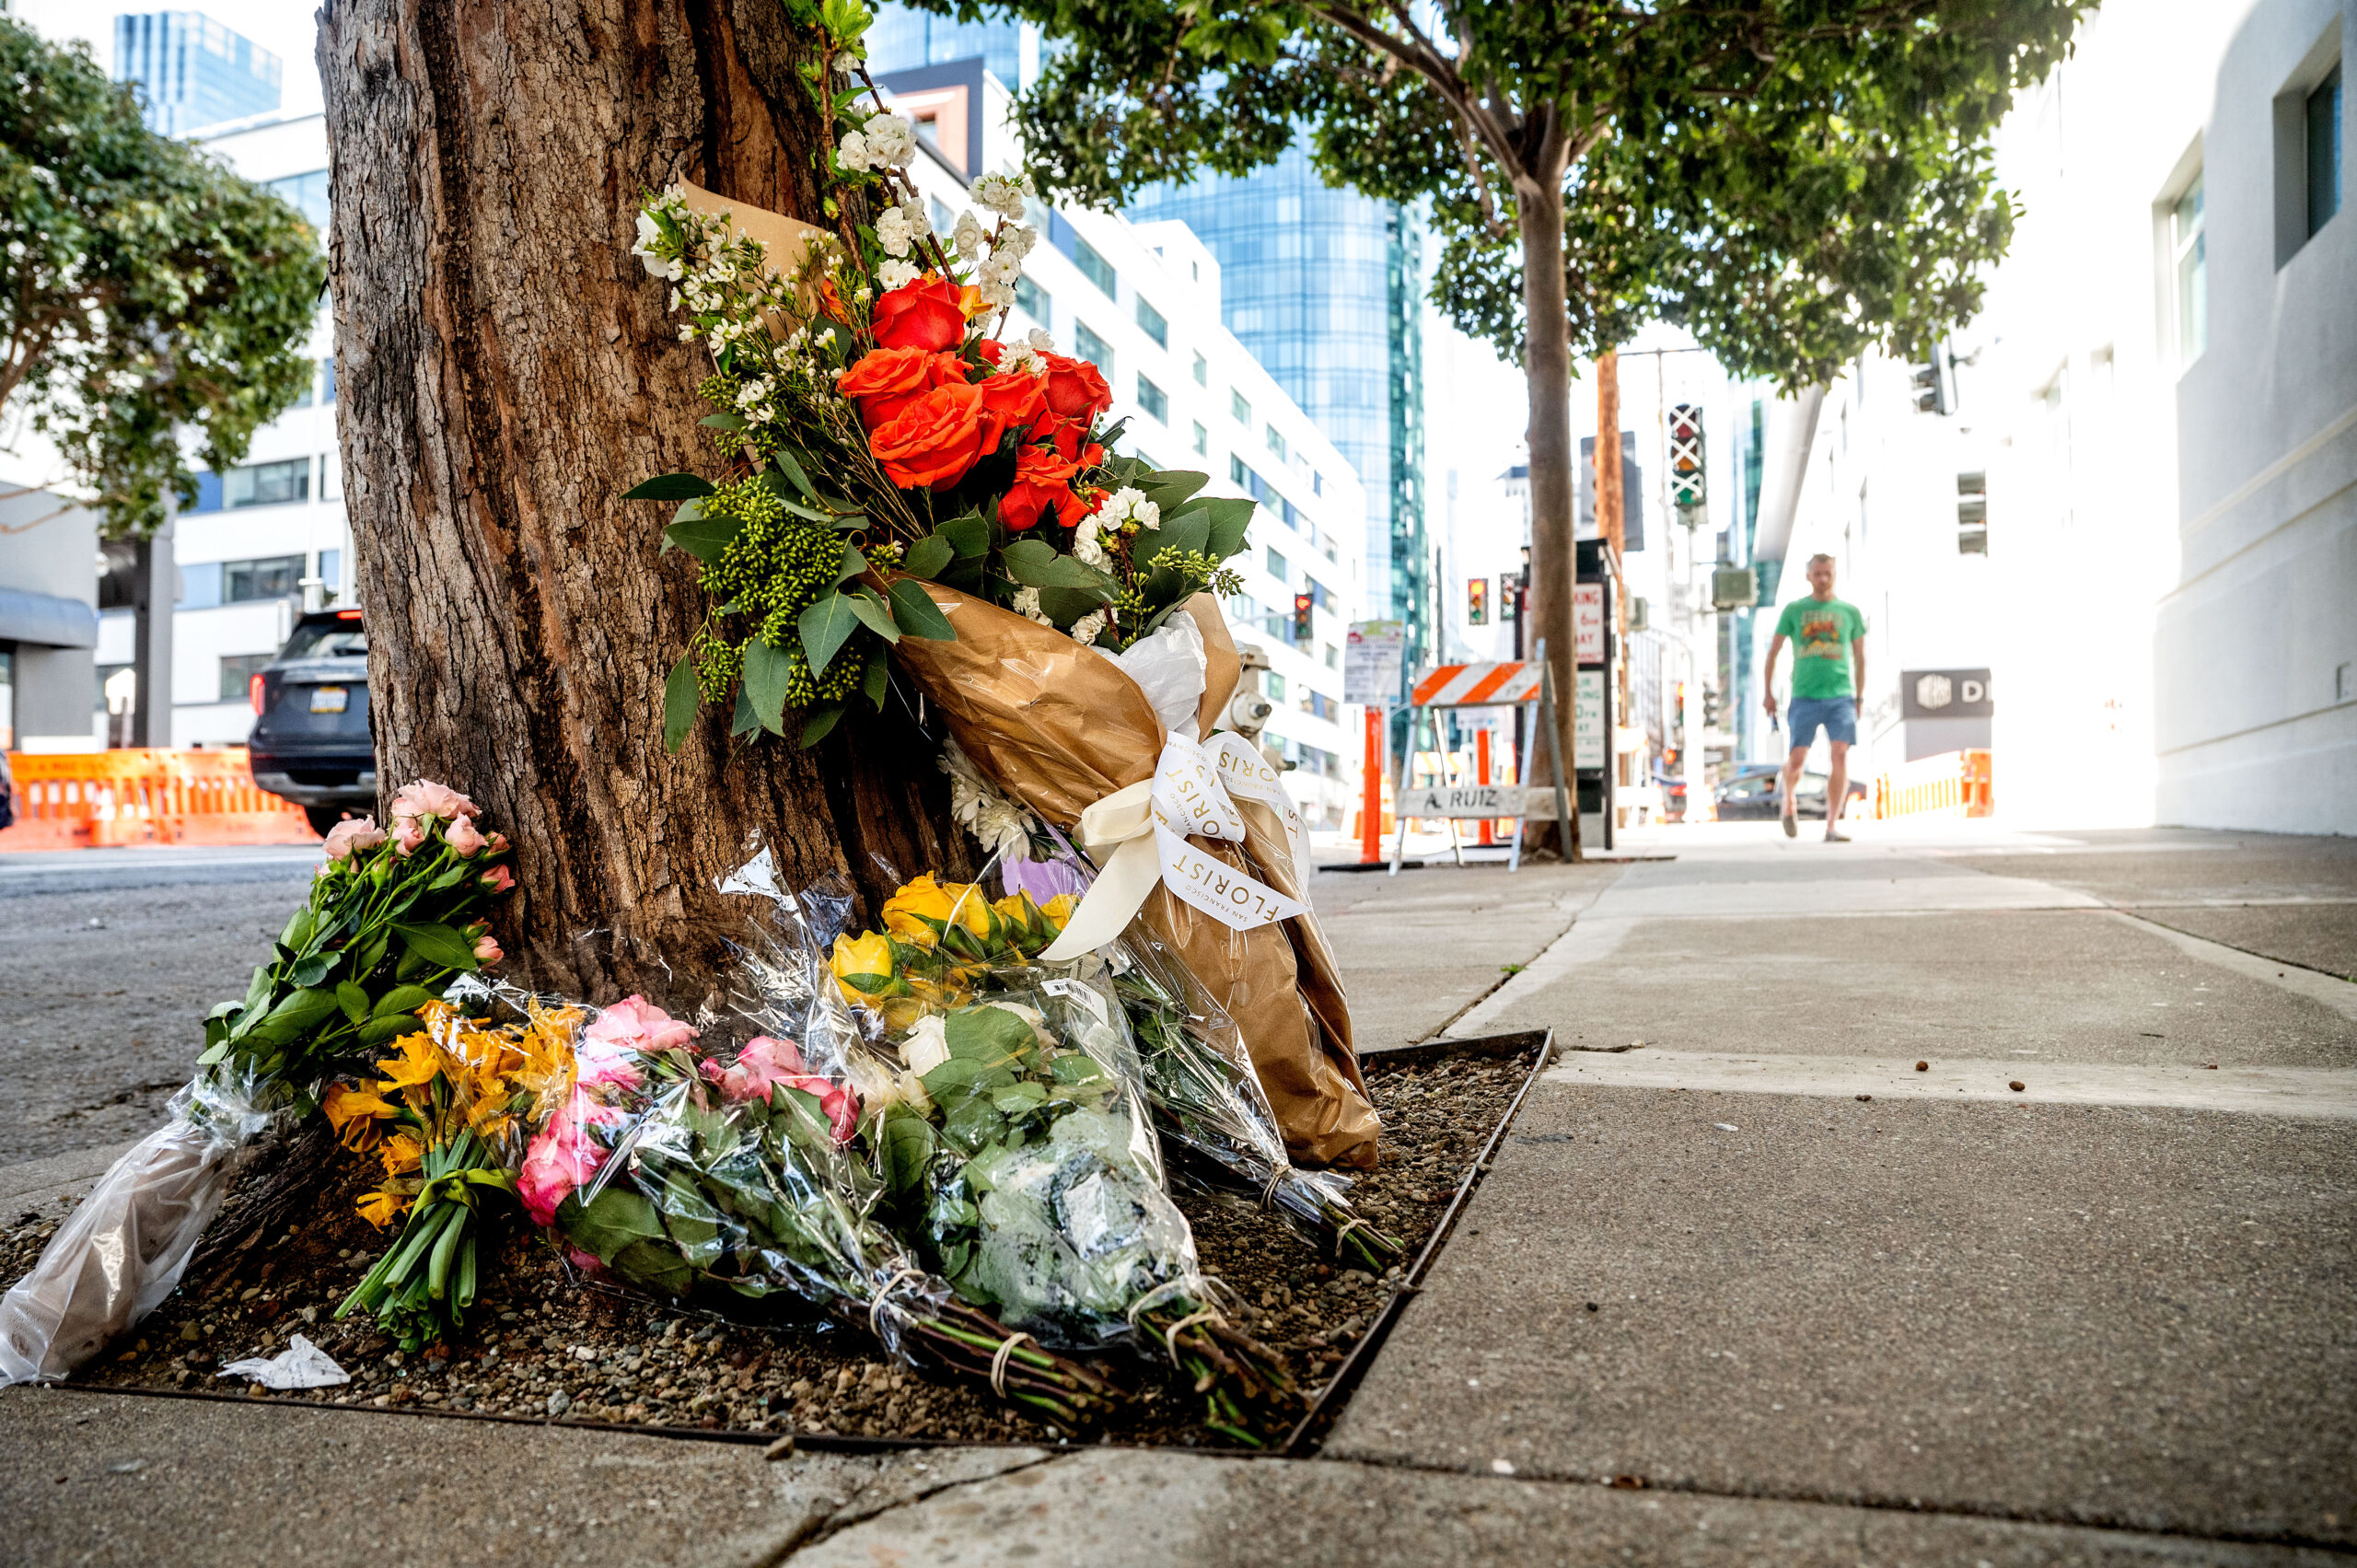 Bouquets of flowers are placed against a tree on a city sidewalk, likely a memorial, with a person walking in the background.